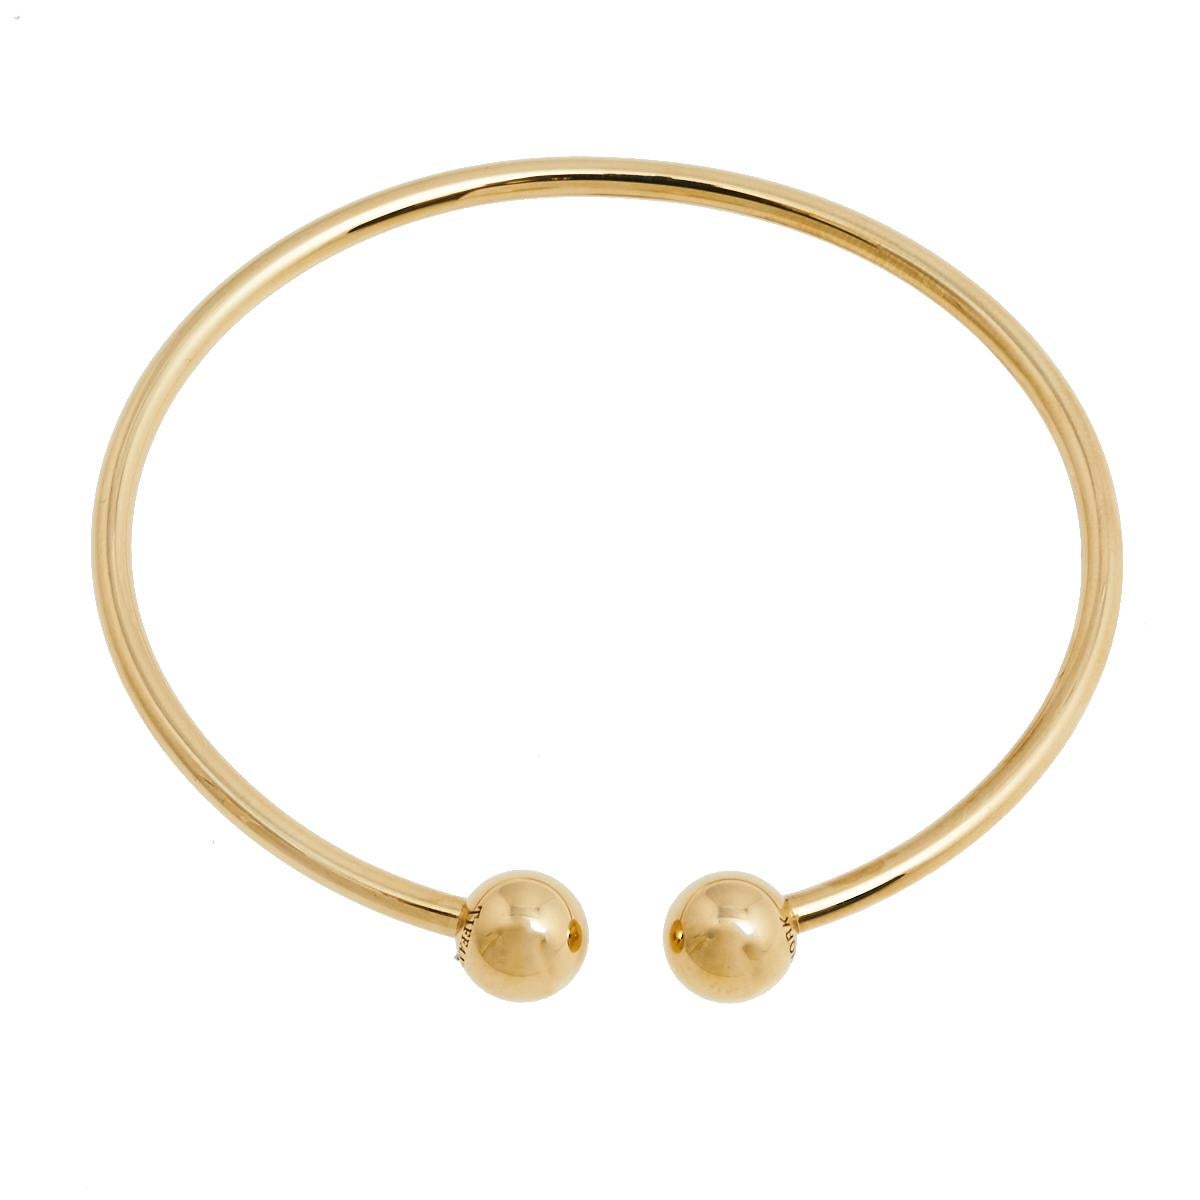 Tiffany & Co Ball Wire Bracelet for a Stylish Look